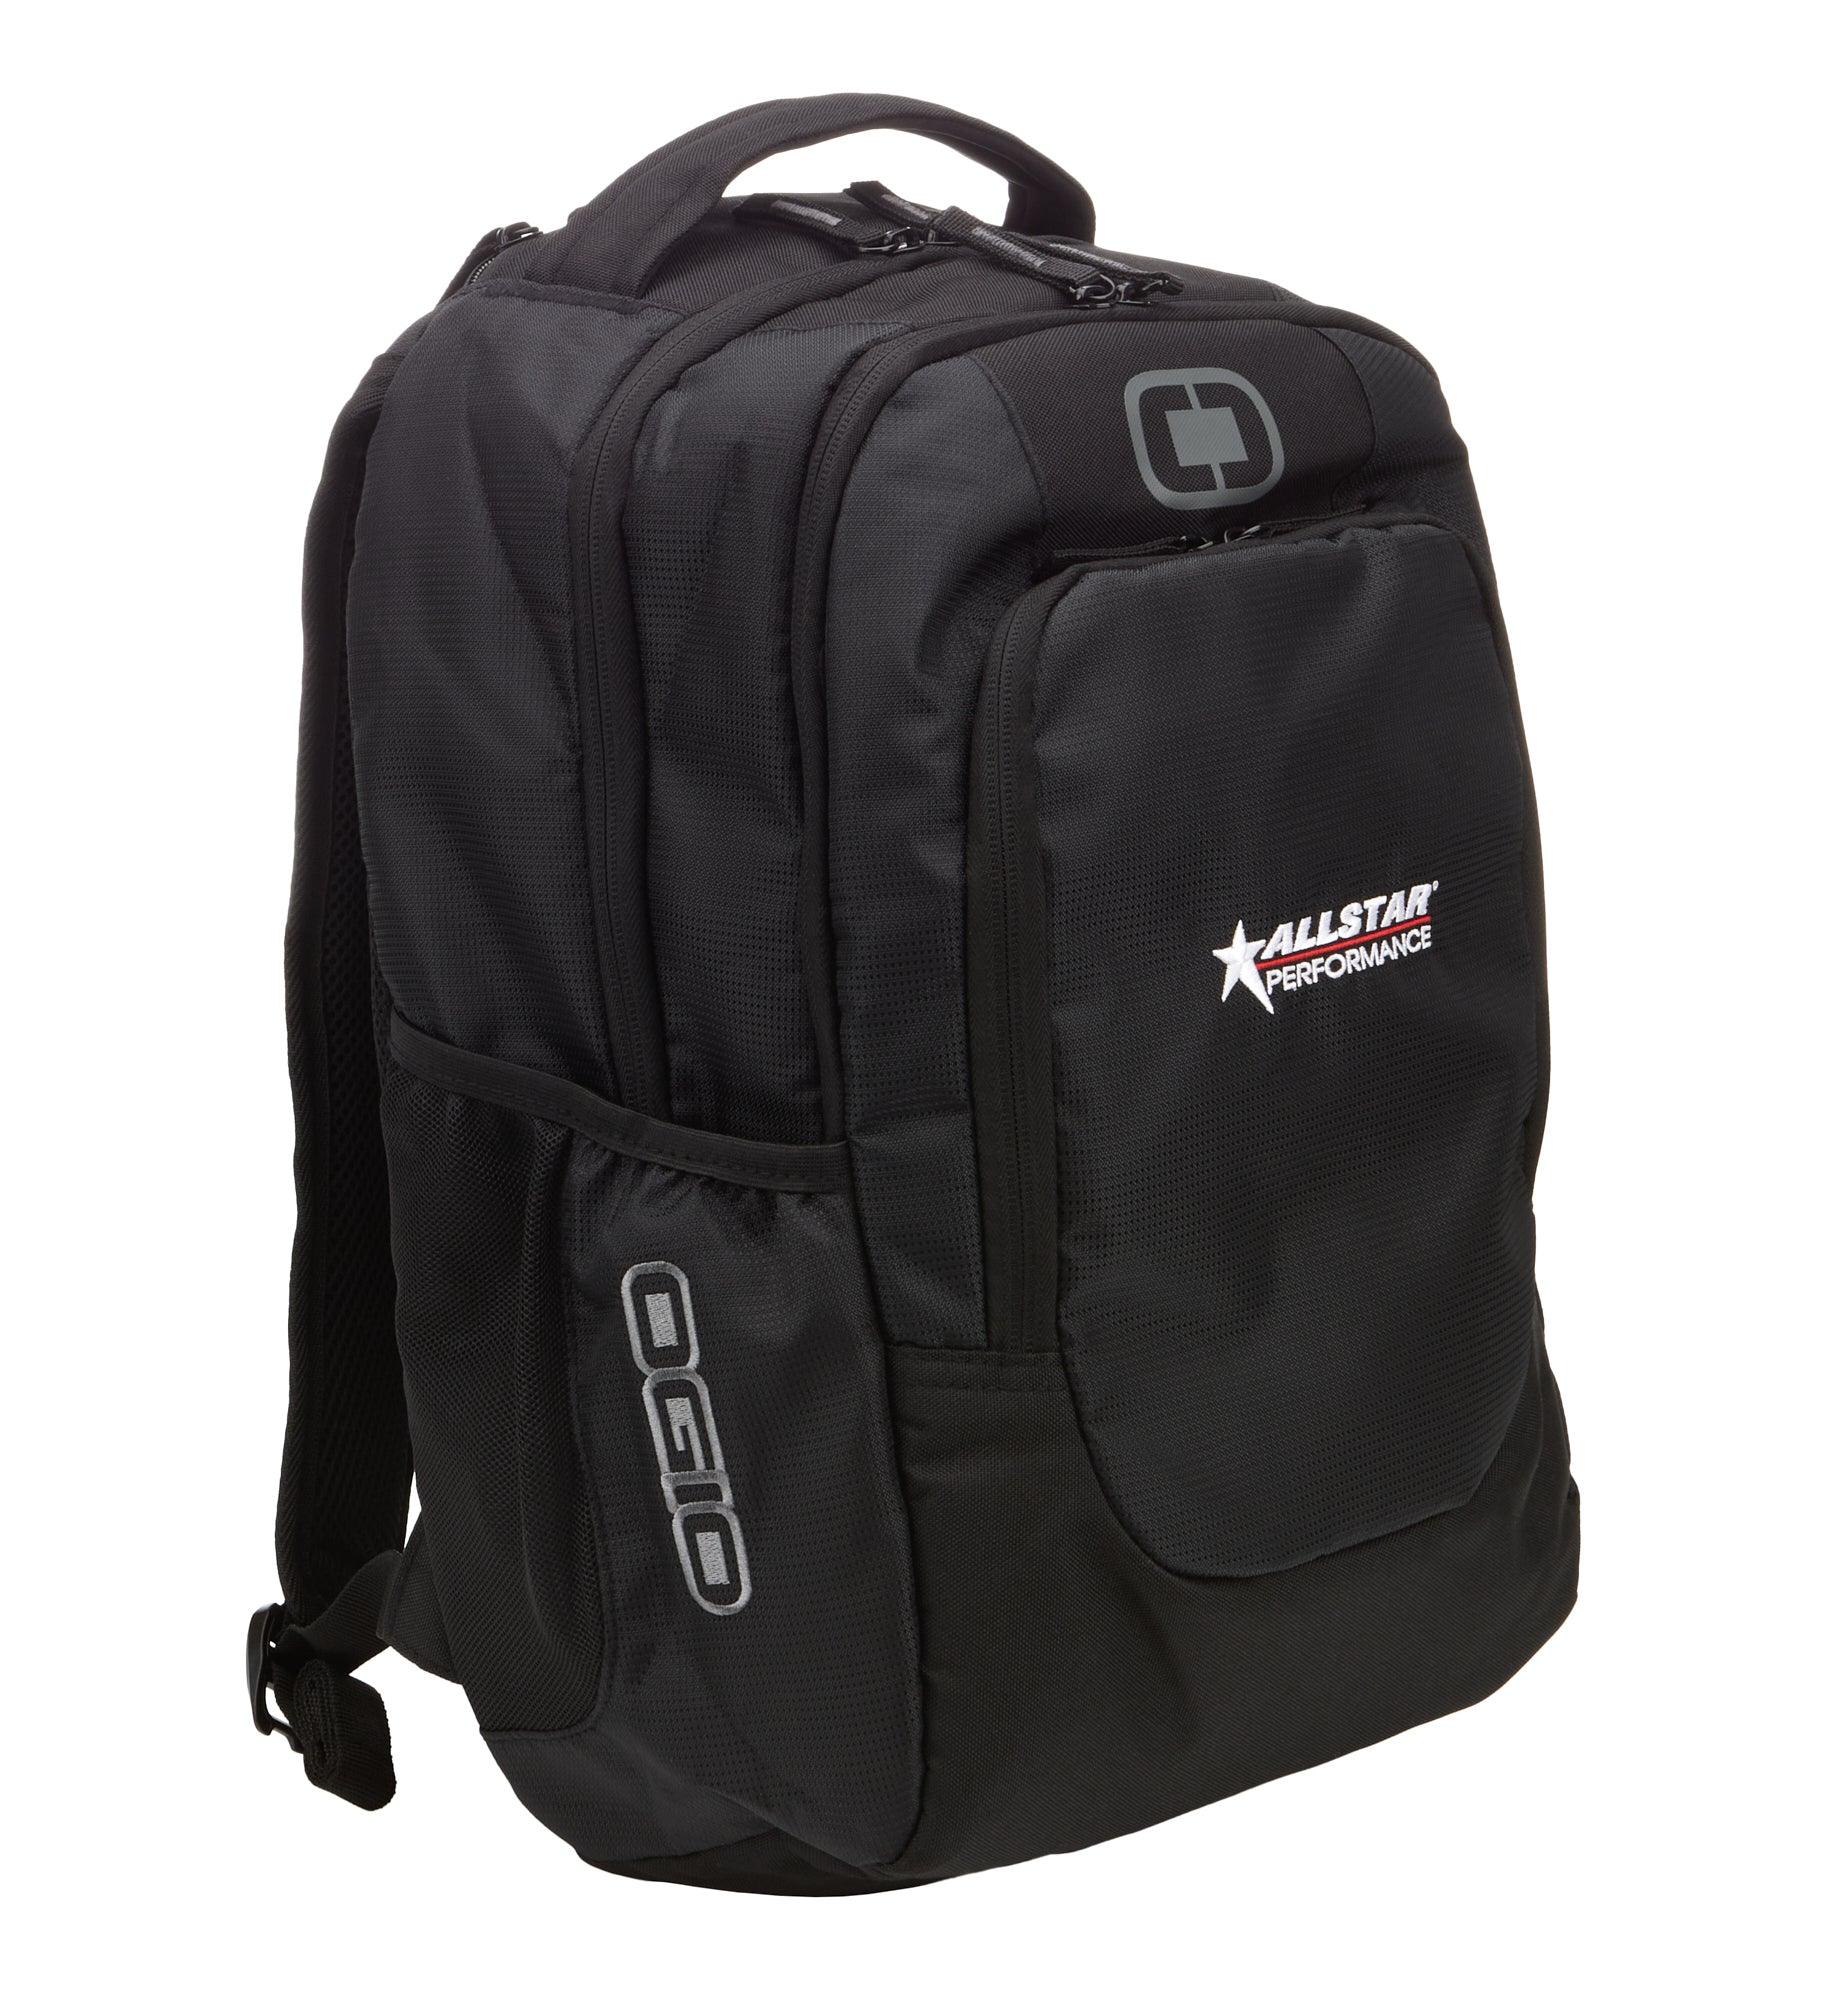 Backpack - Burlile Performance Products